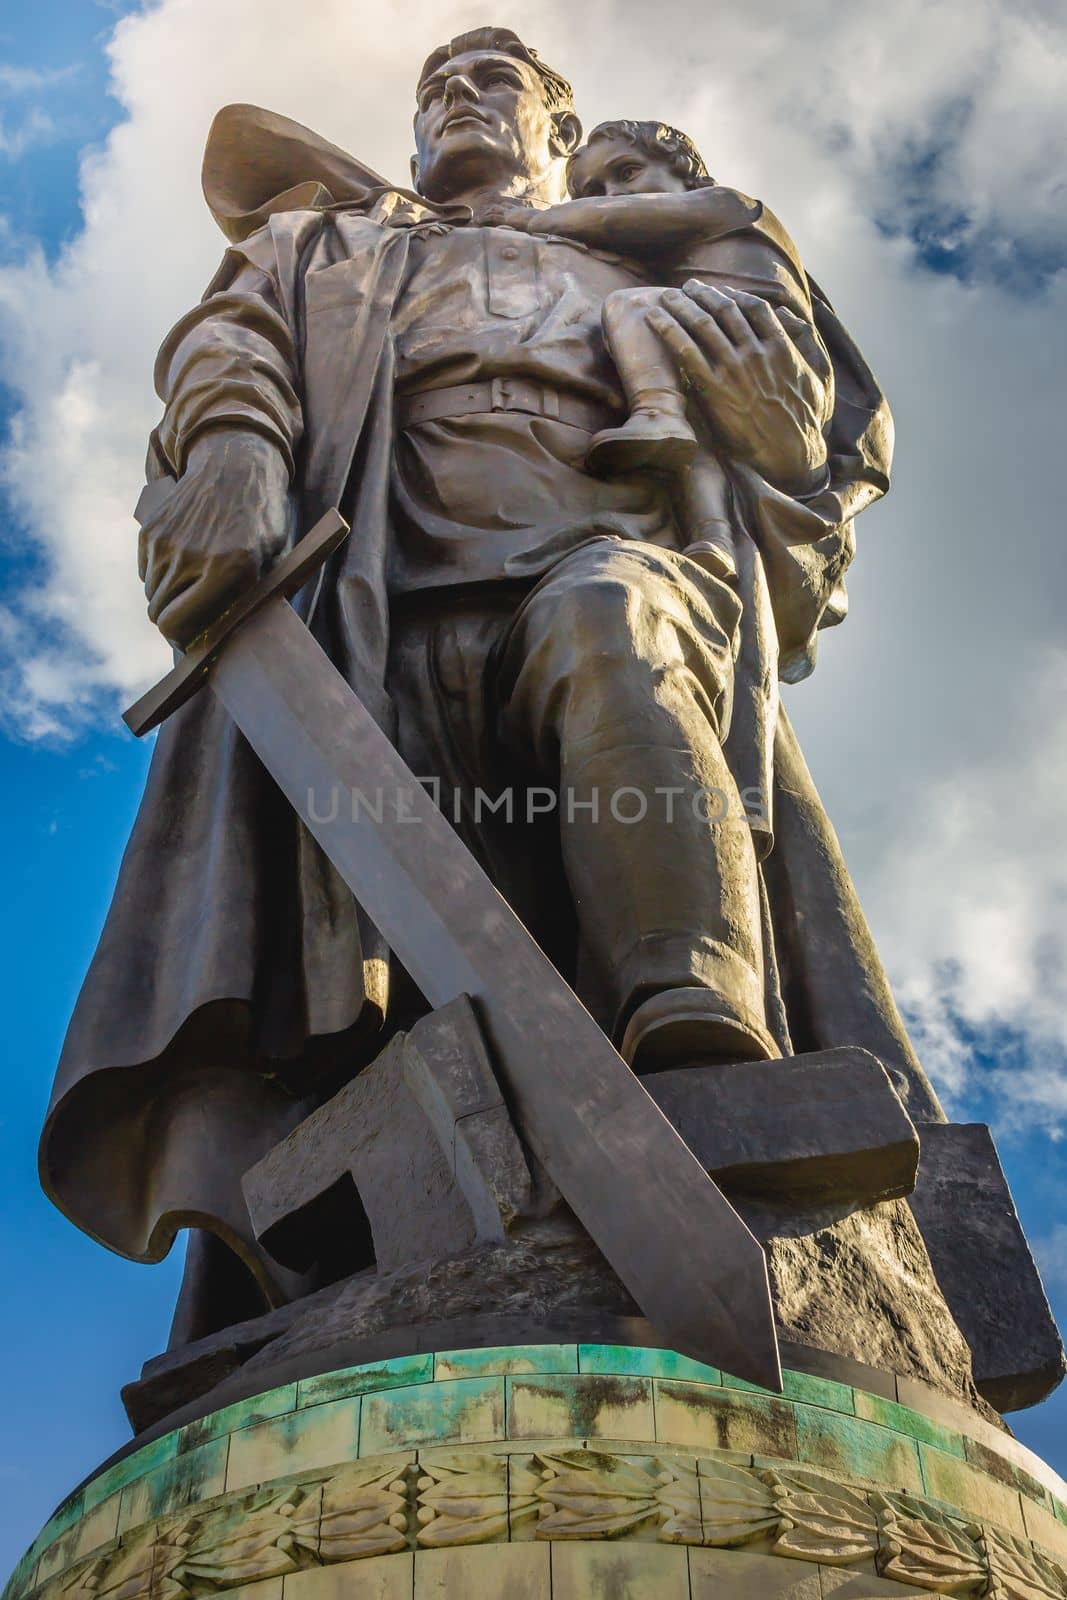 Statue of the heroic Soldier Liberator in Soviet War Memorial at sunset, Berlin, Germany